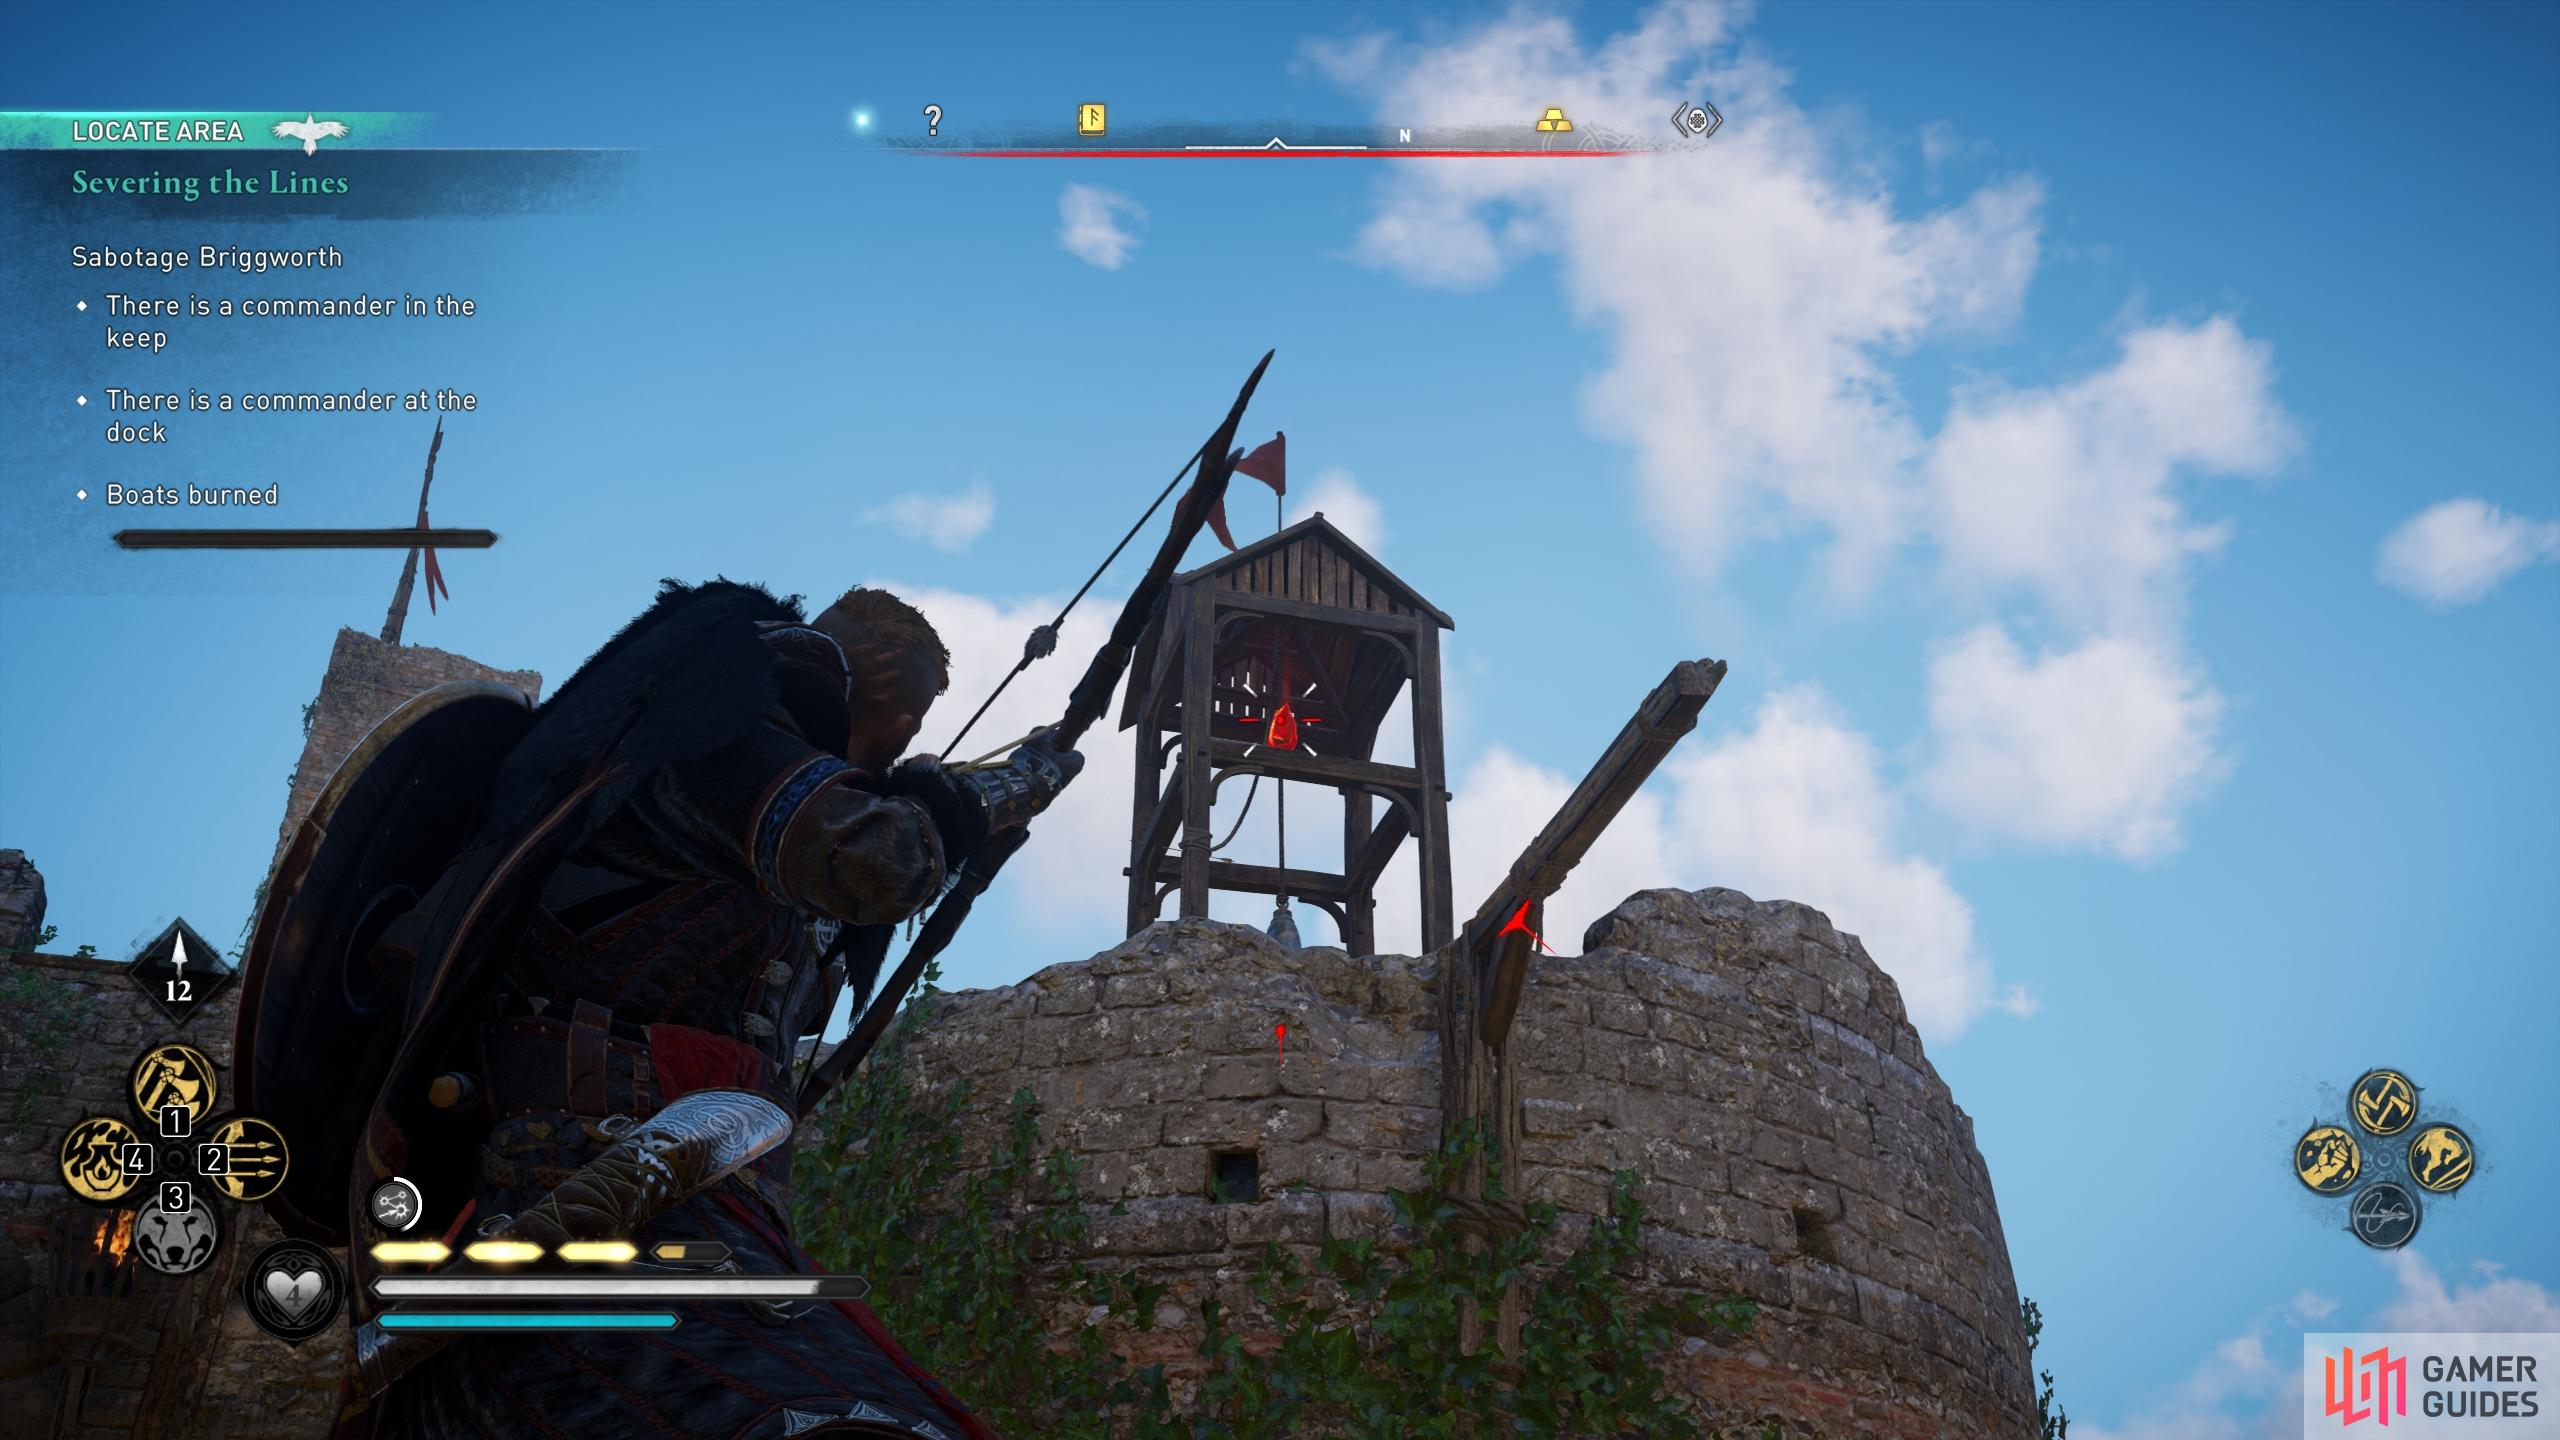 Shoot the links in bell towers to stop guards alerting others to your presence.